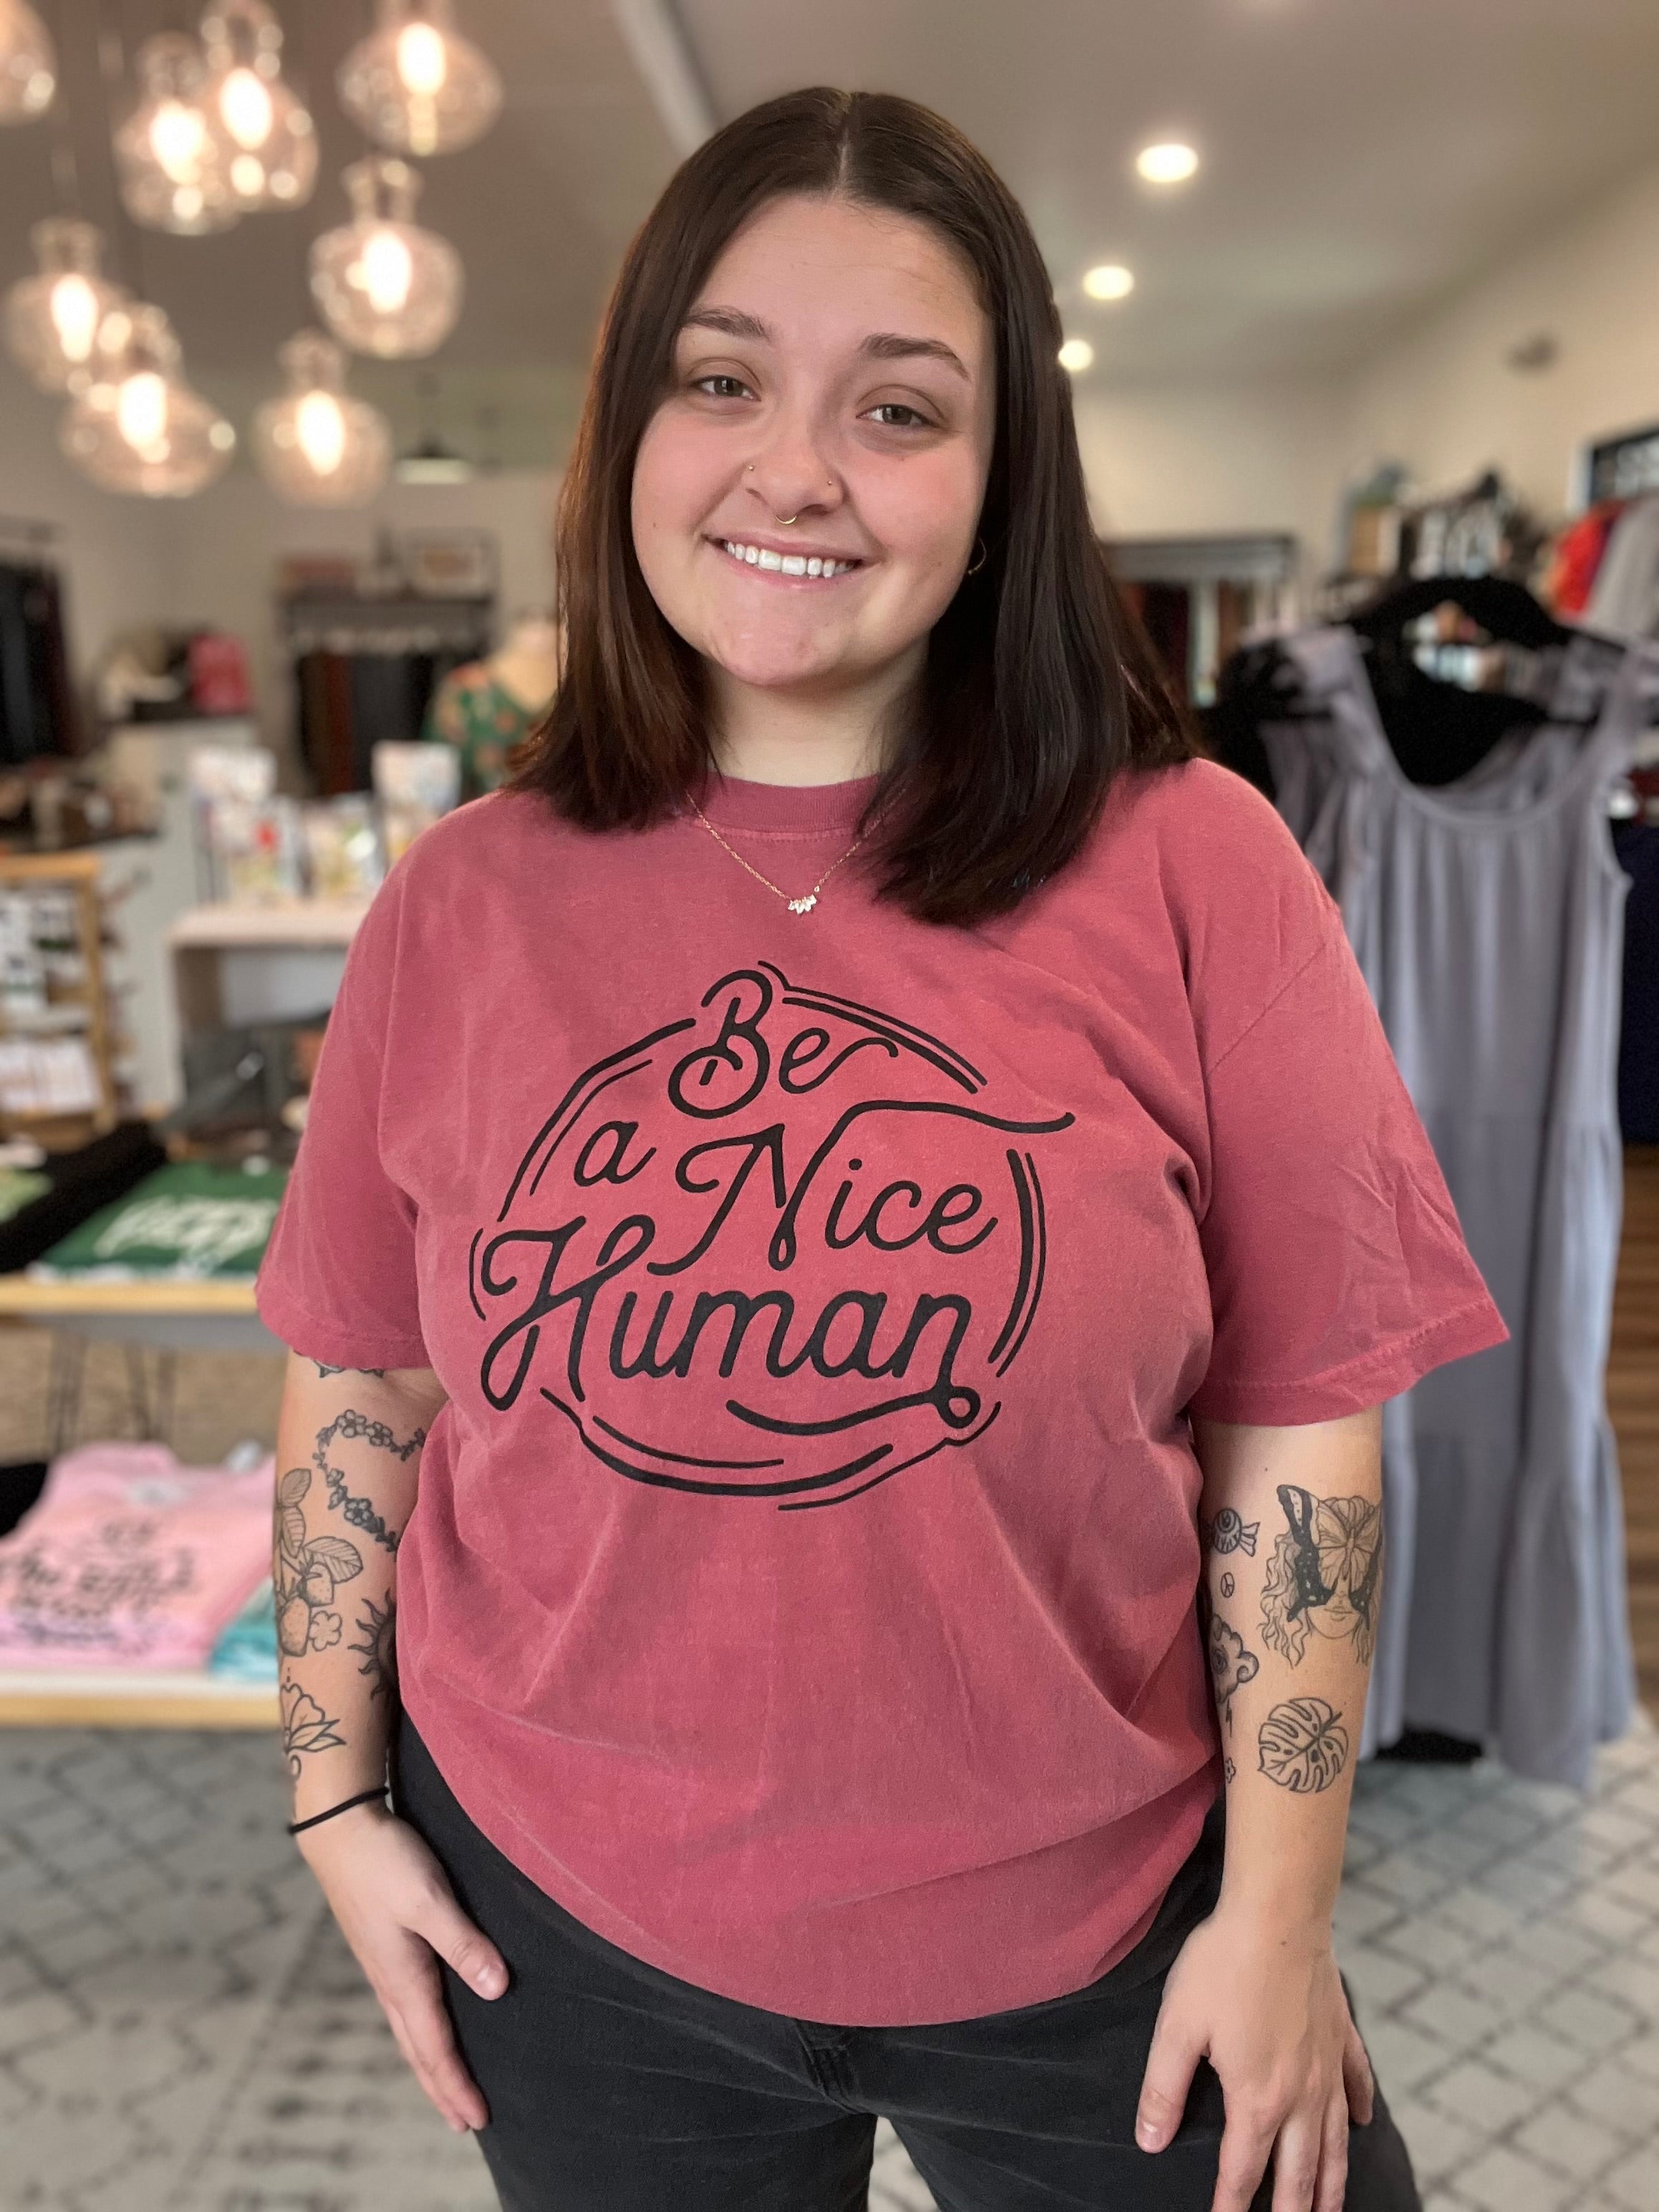 Shop Be A Nice Human Graphic Tee-Graphic Tee at Ruby Joy Boutique, a Women's Clothing Store in Pickerington, Ohio